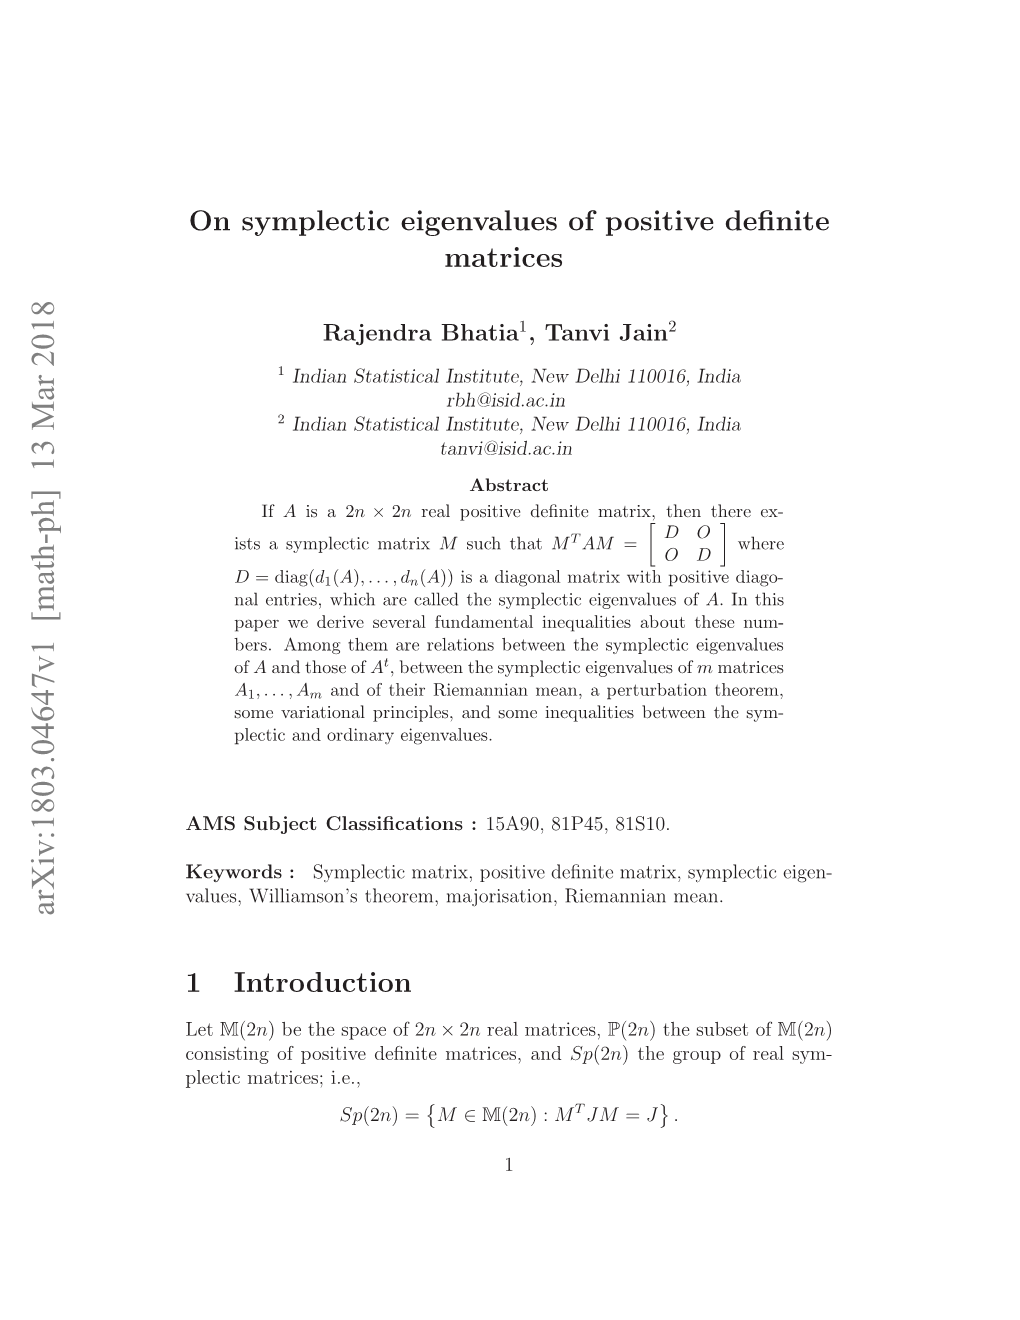 On Symplectic Eigenvalues of Positive Definite Matrices